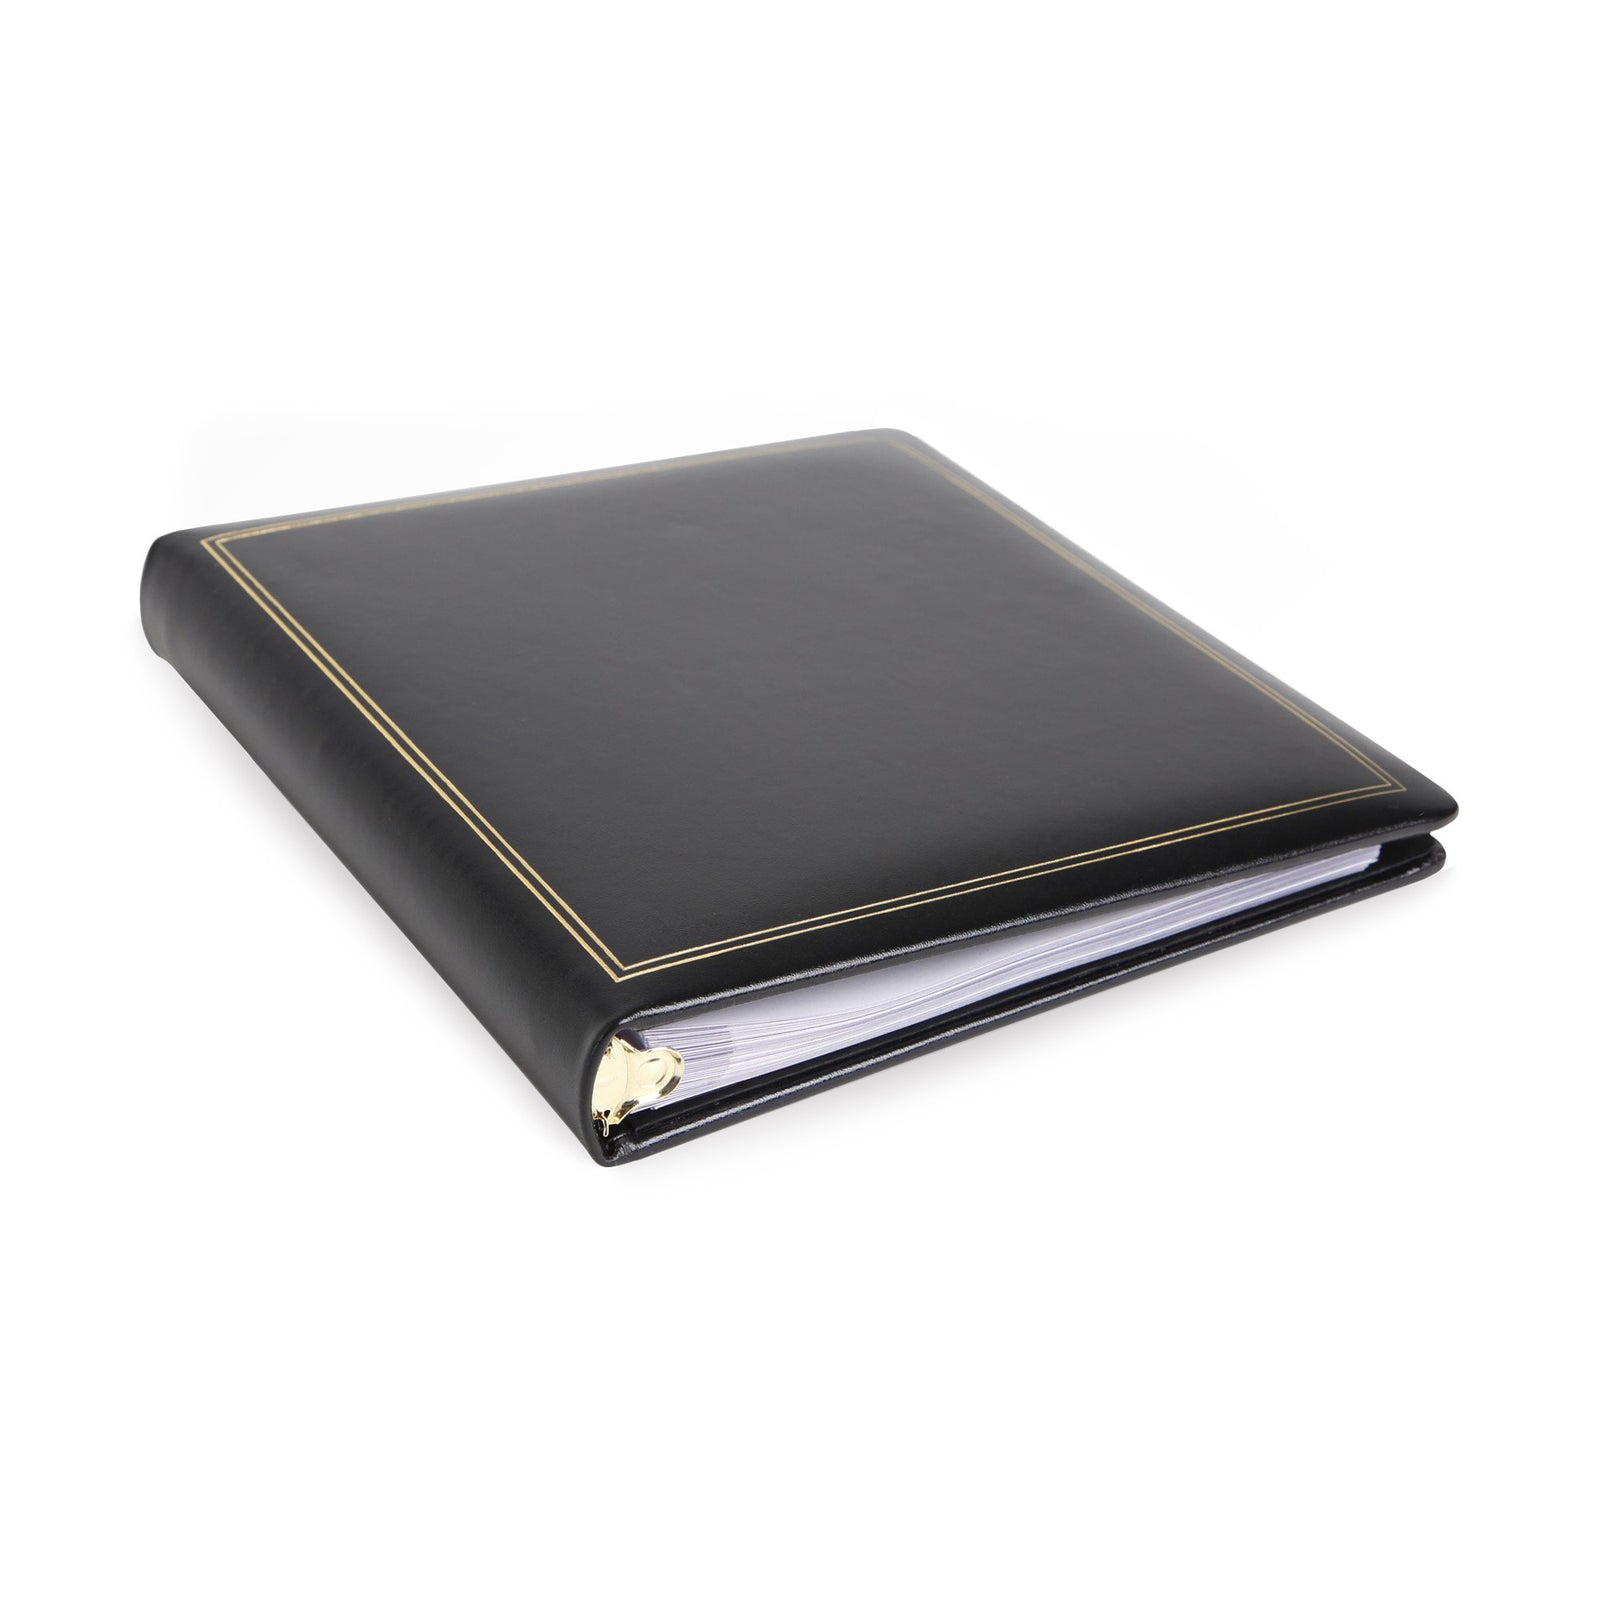 Leather photo album - Made in Italy